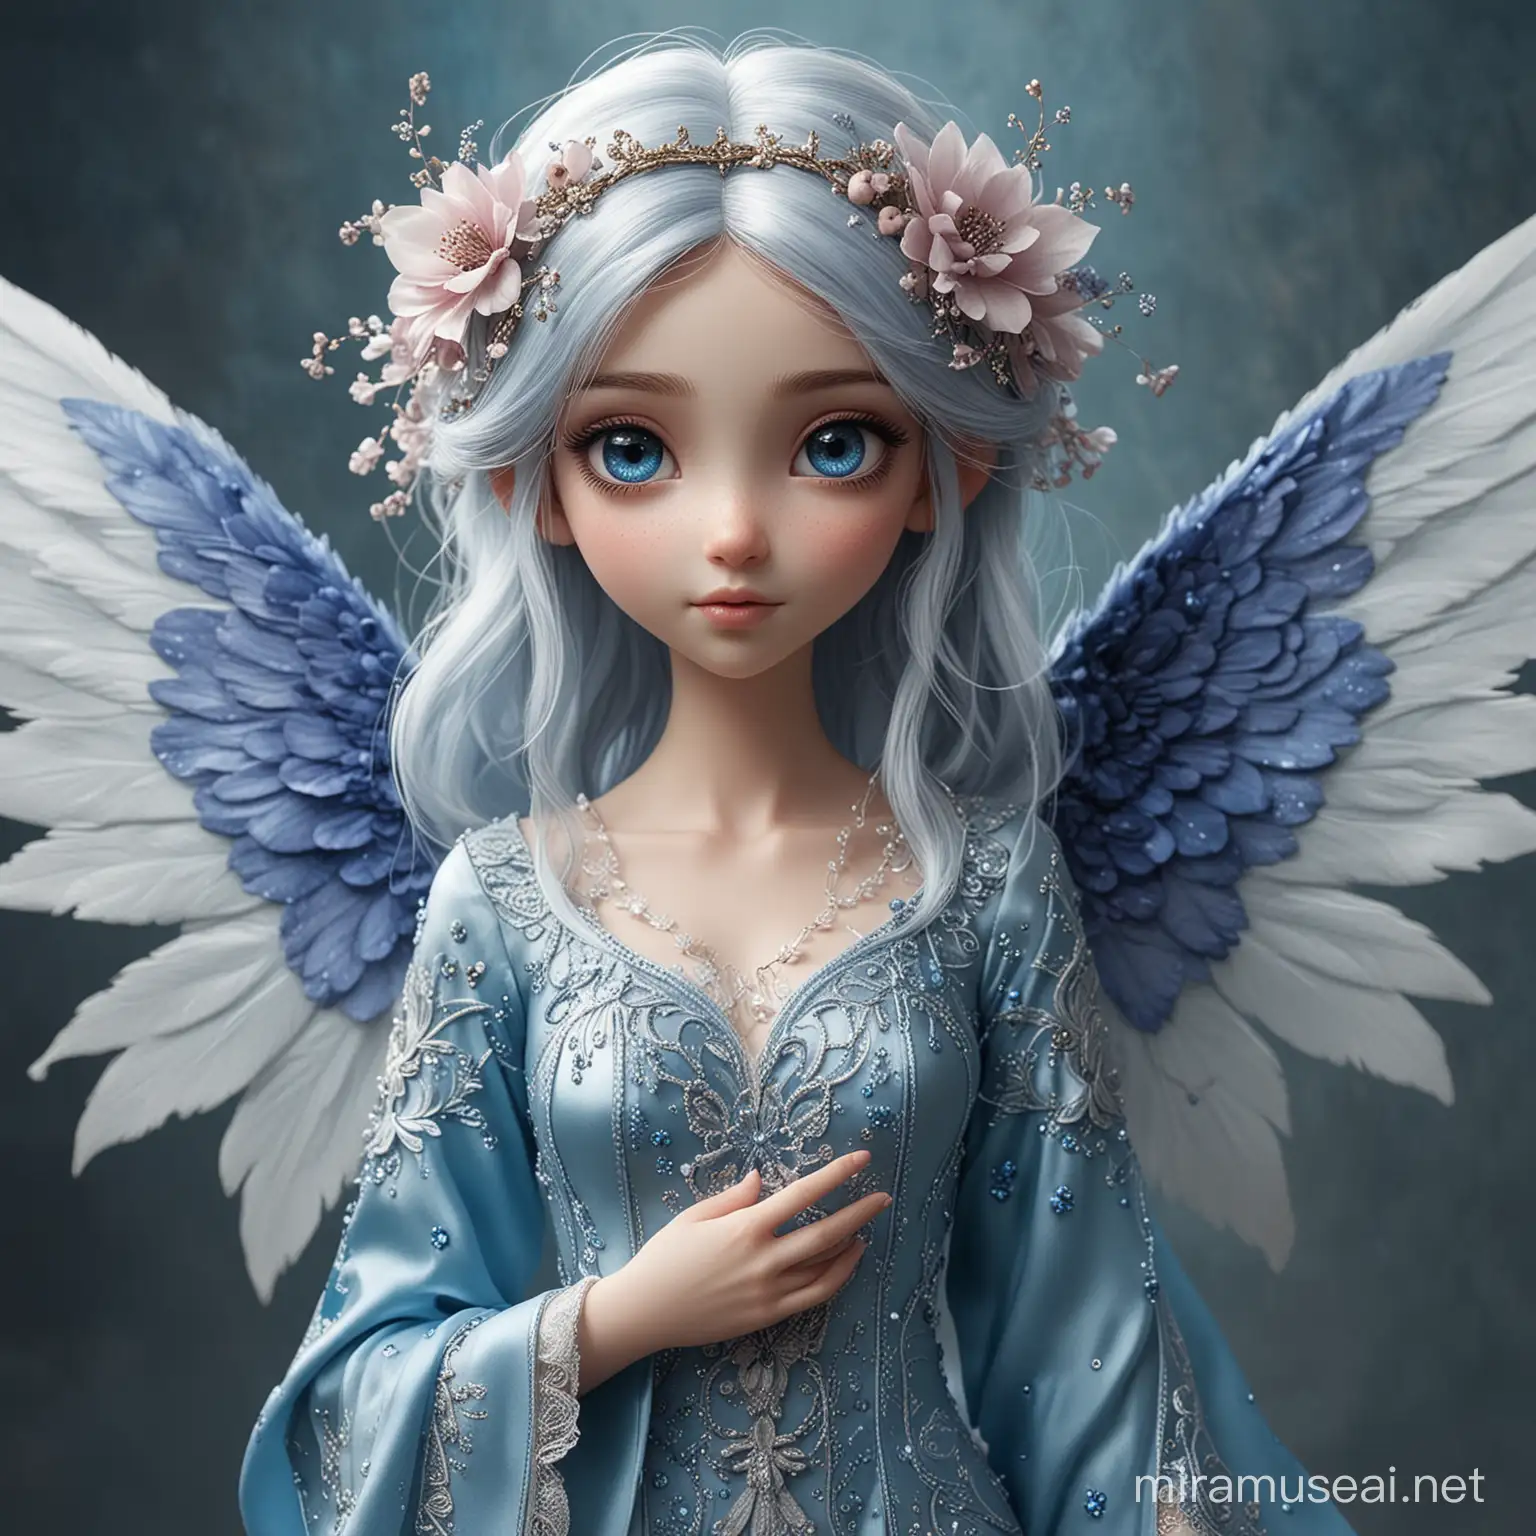 Create an image of Pennwyng Blossom, a faerie character standing between 2 and 2.5 feet tall. She features Satin Azure-style wings with overall blue hues. One of her eyes resembles twilight, characterized by a dark blue color speckled with white, while the other eye is pure white, although she can see perfectly fine with it. Despite her self-consciousness about her unique eye, she wears intricate clothes. This attire contrasts with her personality, as she is not very sociable and feels awkward in conversations.